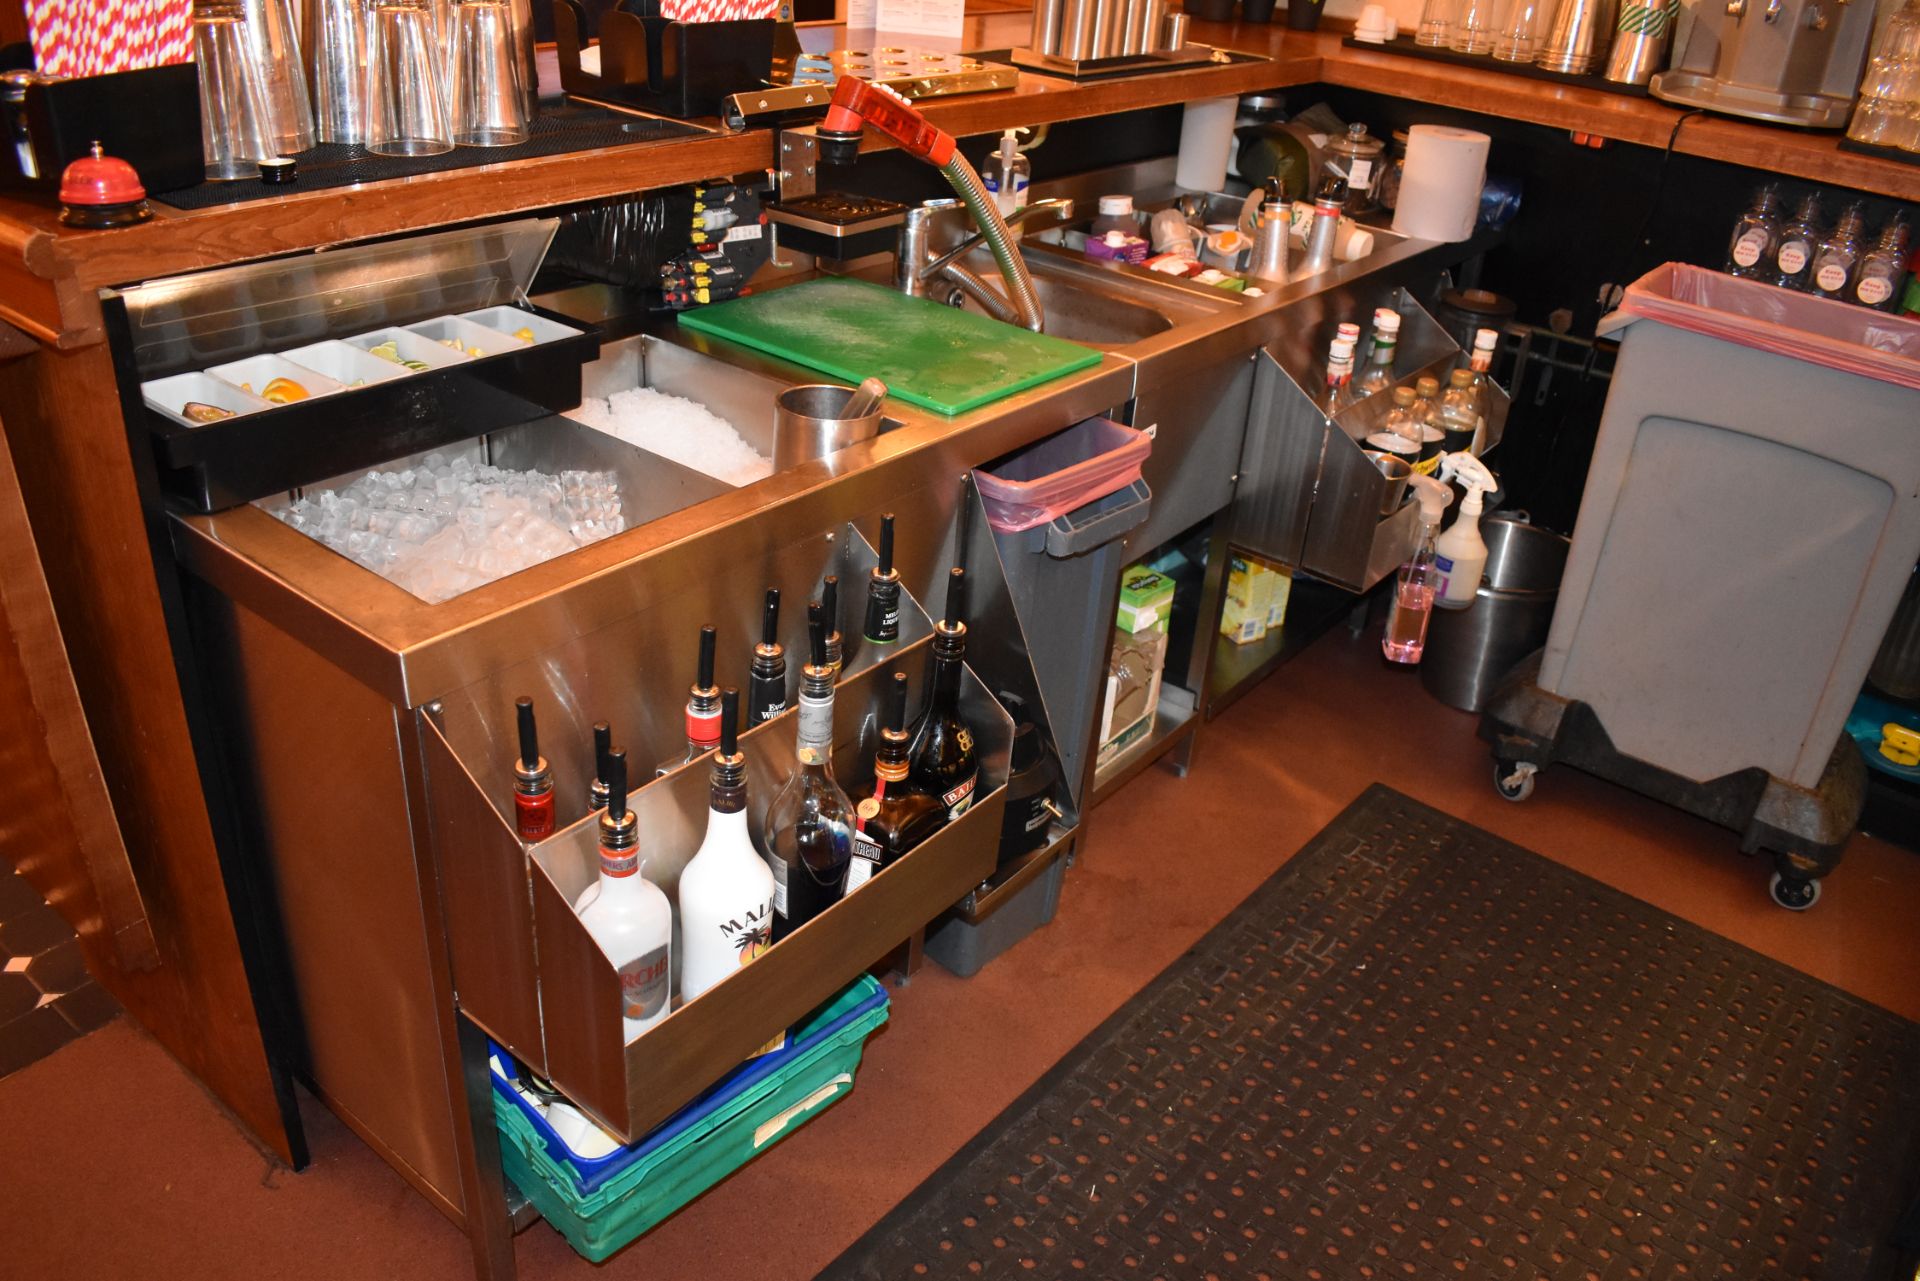 2 x Stainless Steel Backbar Drink Preparation Units With 2 x Ice Wells, 1 x Basin With Mixer Tap, - Image 10 of 10